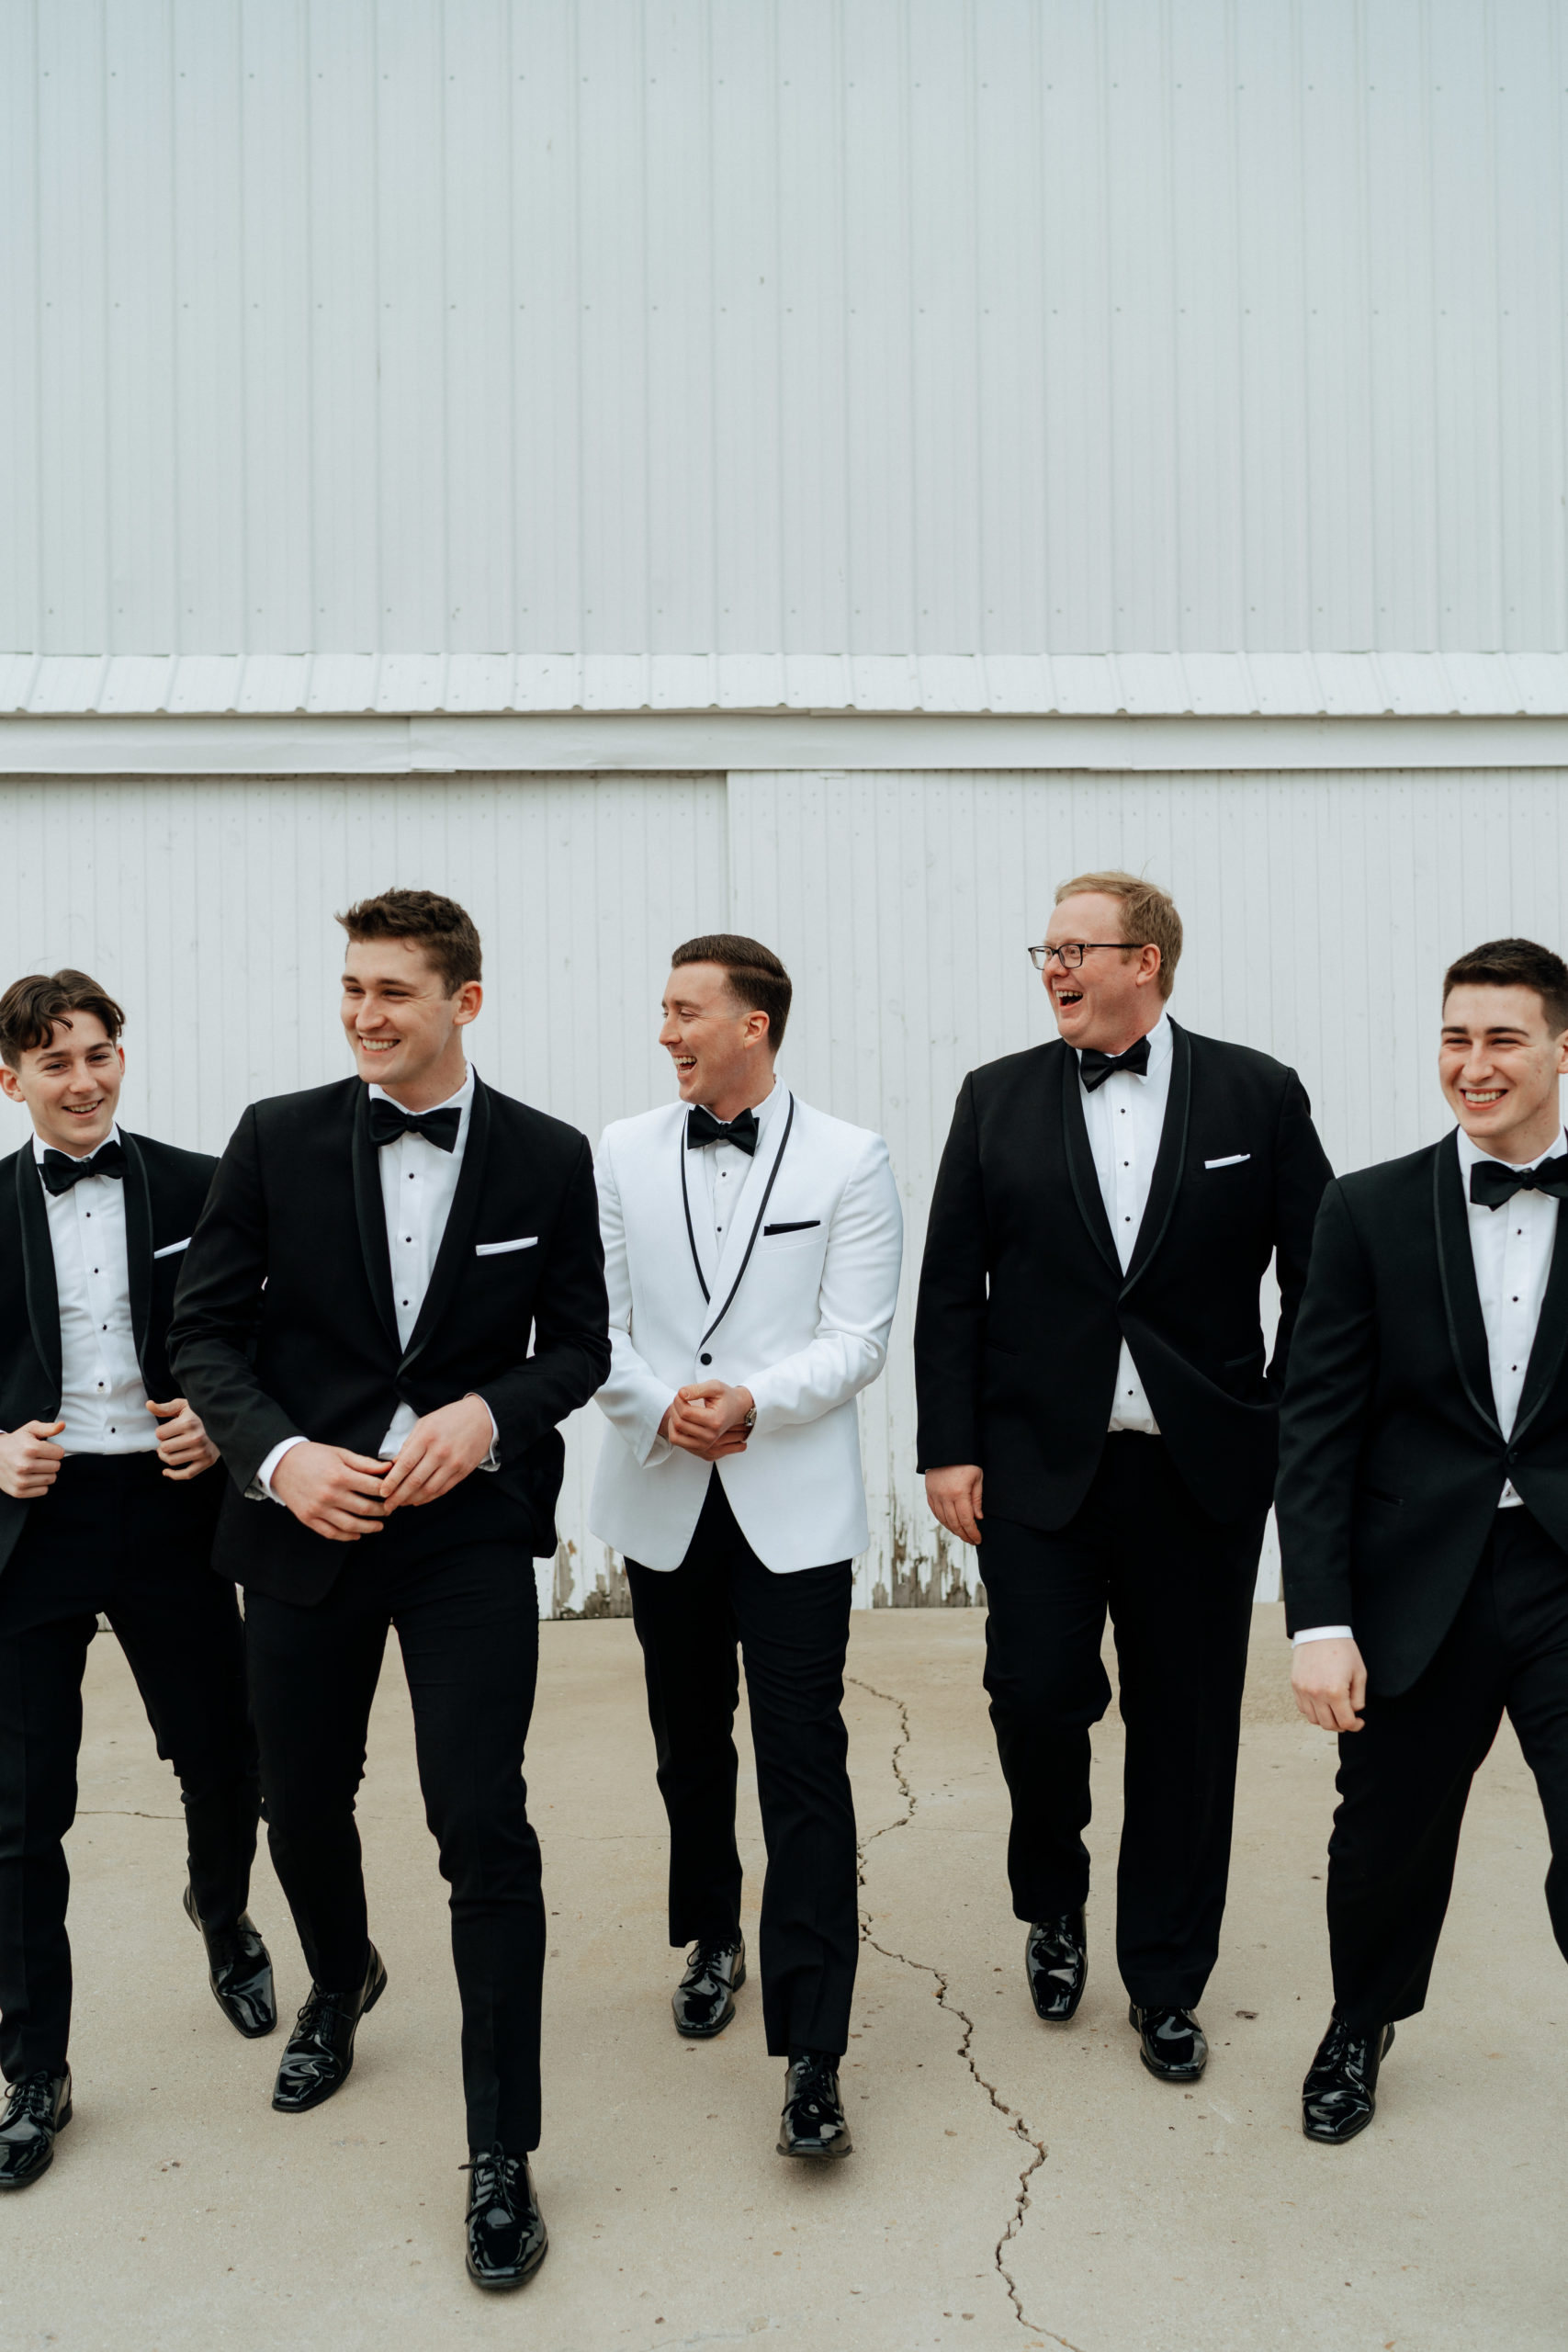 This is a picture of a groomsmen party taking pictures at The Barn At Fairview Acres